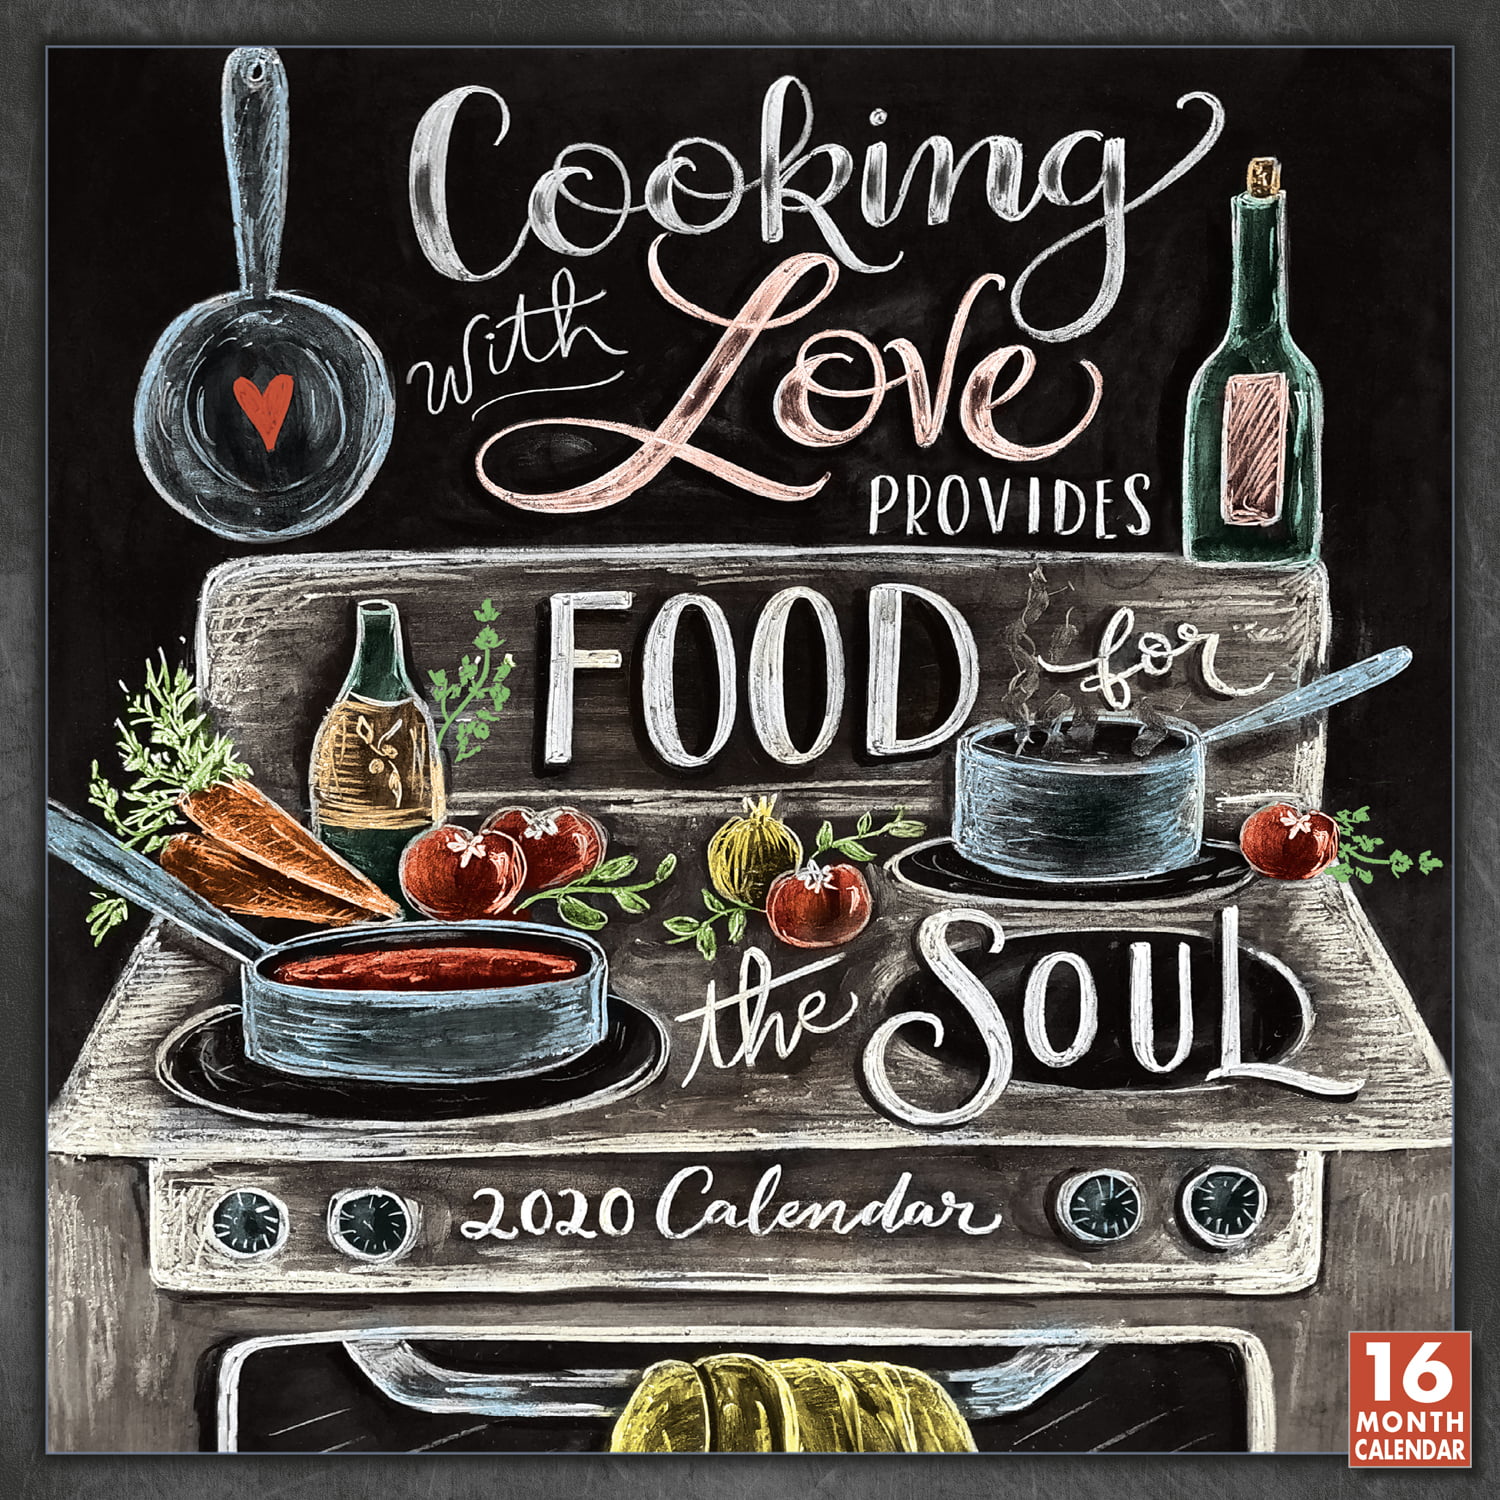 Albums 96+ Images cooking with love provides food for the soul Excellent